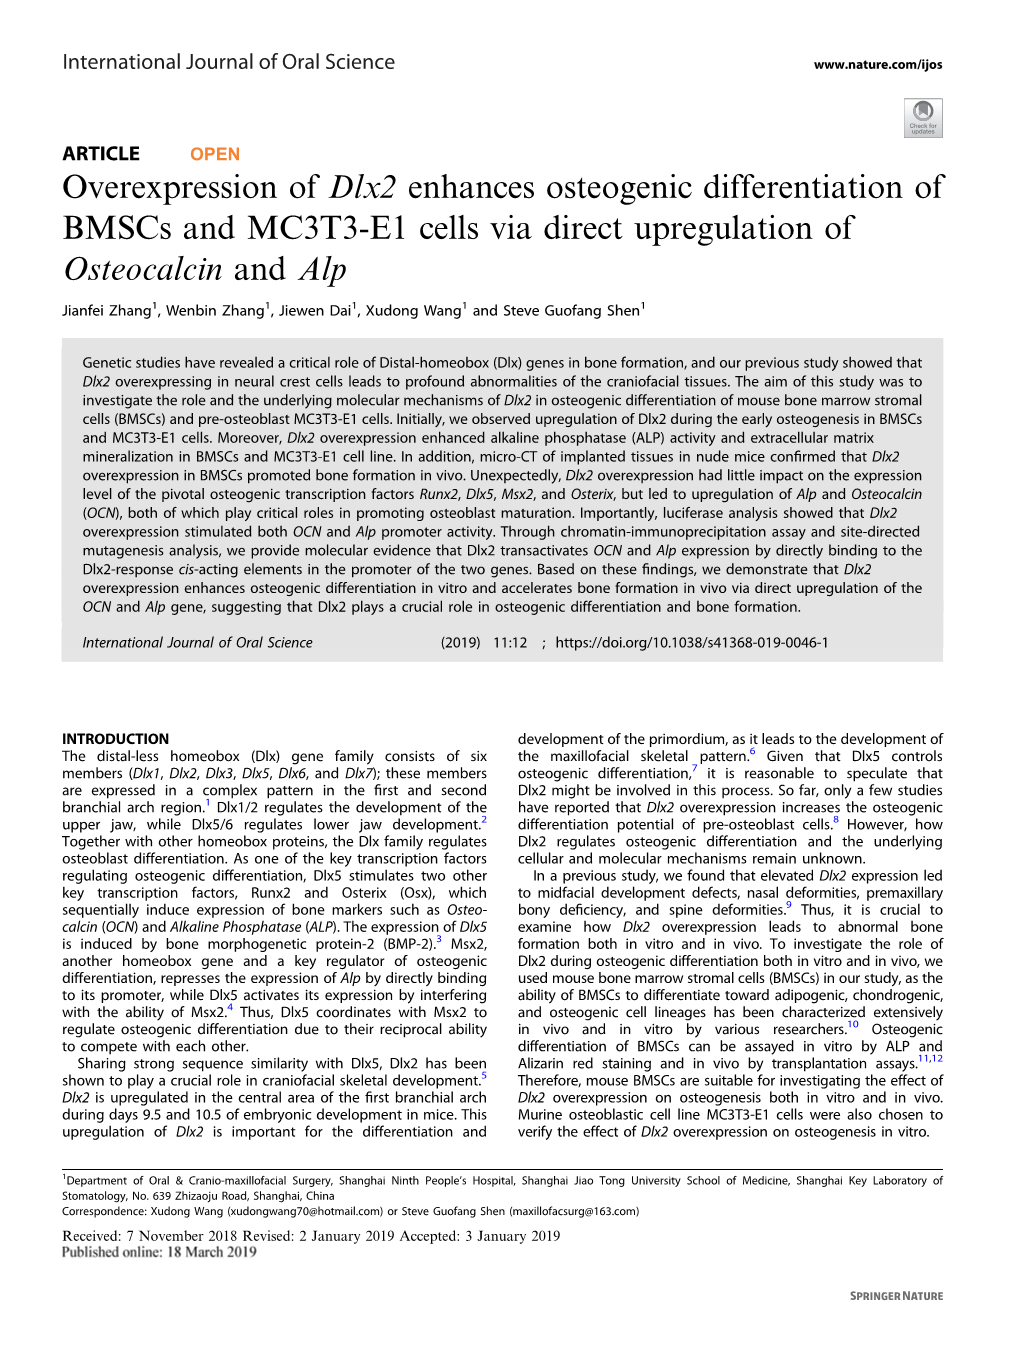 Overexpression of Dlx2 Enhances Osteogenic Differentiation of Bmscs and MC3T3-E1 Cells Via Direct Upregulation of Osteocalcin and Alp